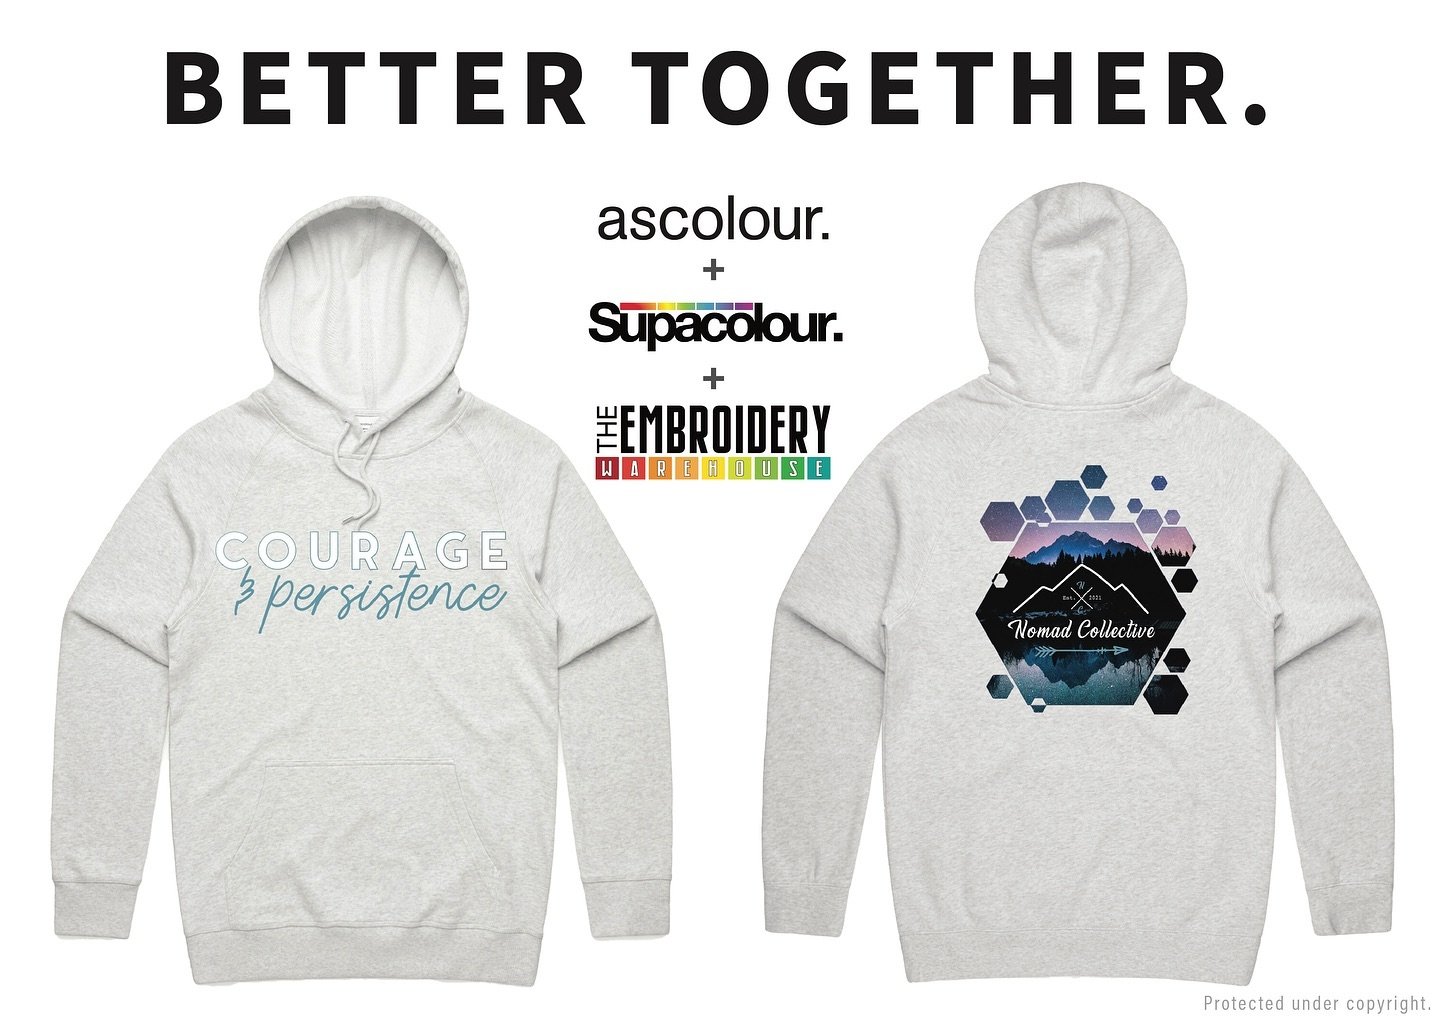 Some things are just better together, and we&rsquo;ve got the goods to make your digital prints hit right! 
@ascolour + @supacolournz